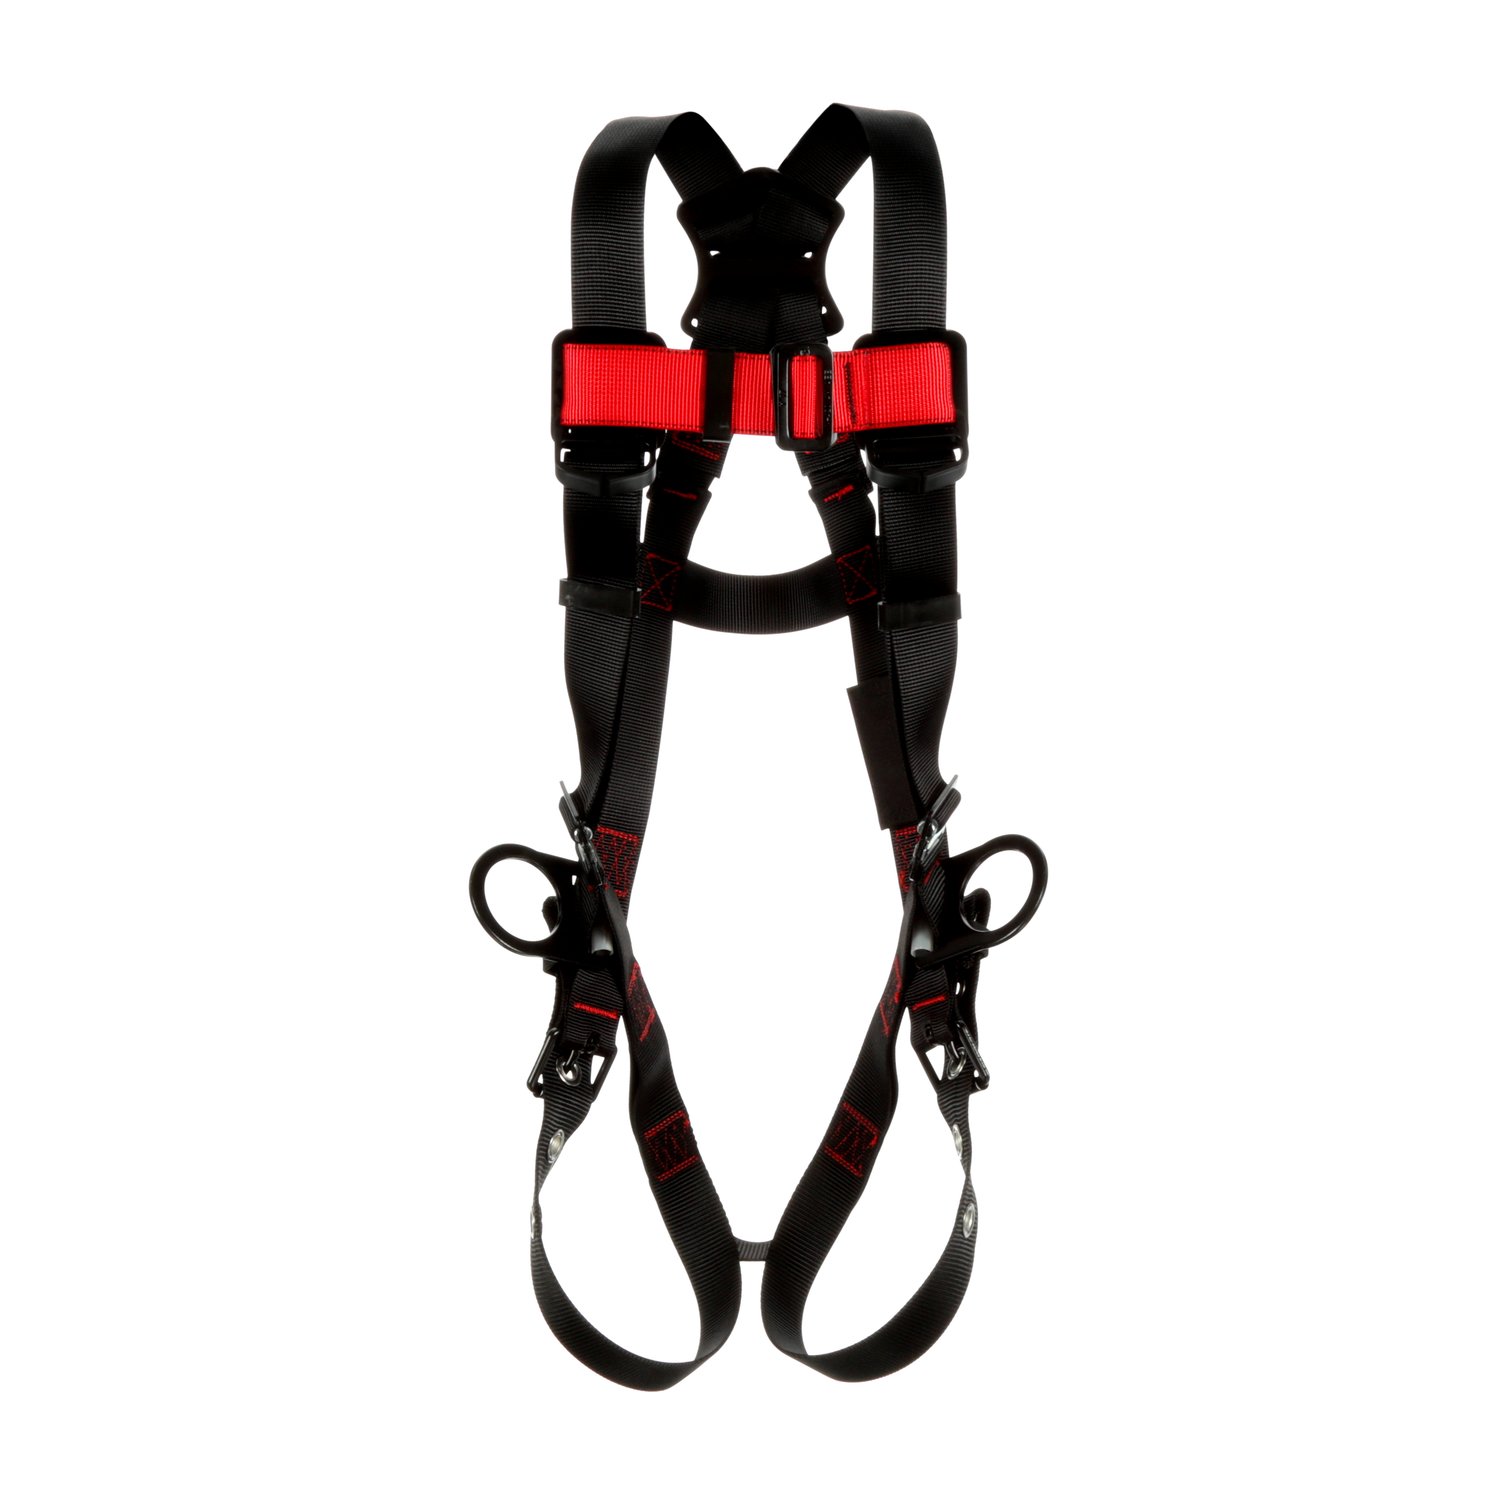 7100184612 - 3M Protecta P200 Vest Positioning Safety Harness 1161533, X-Large